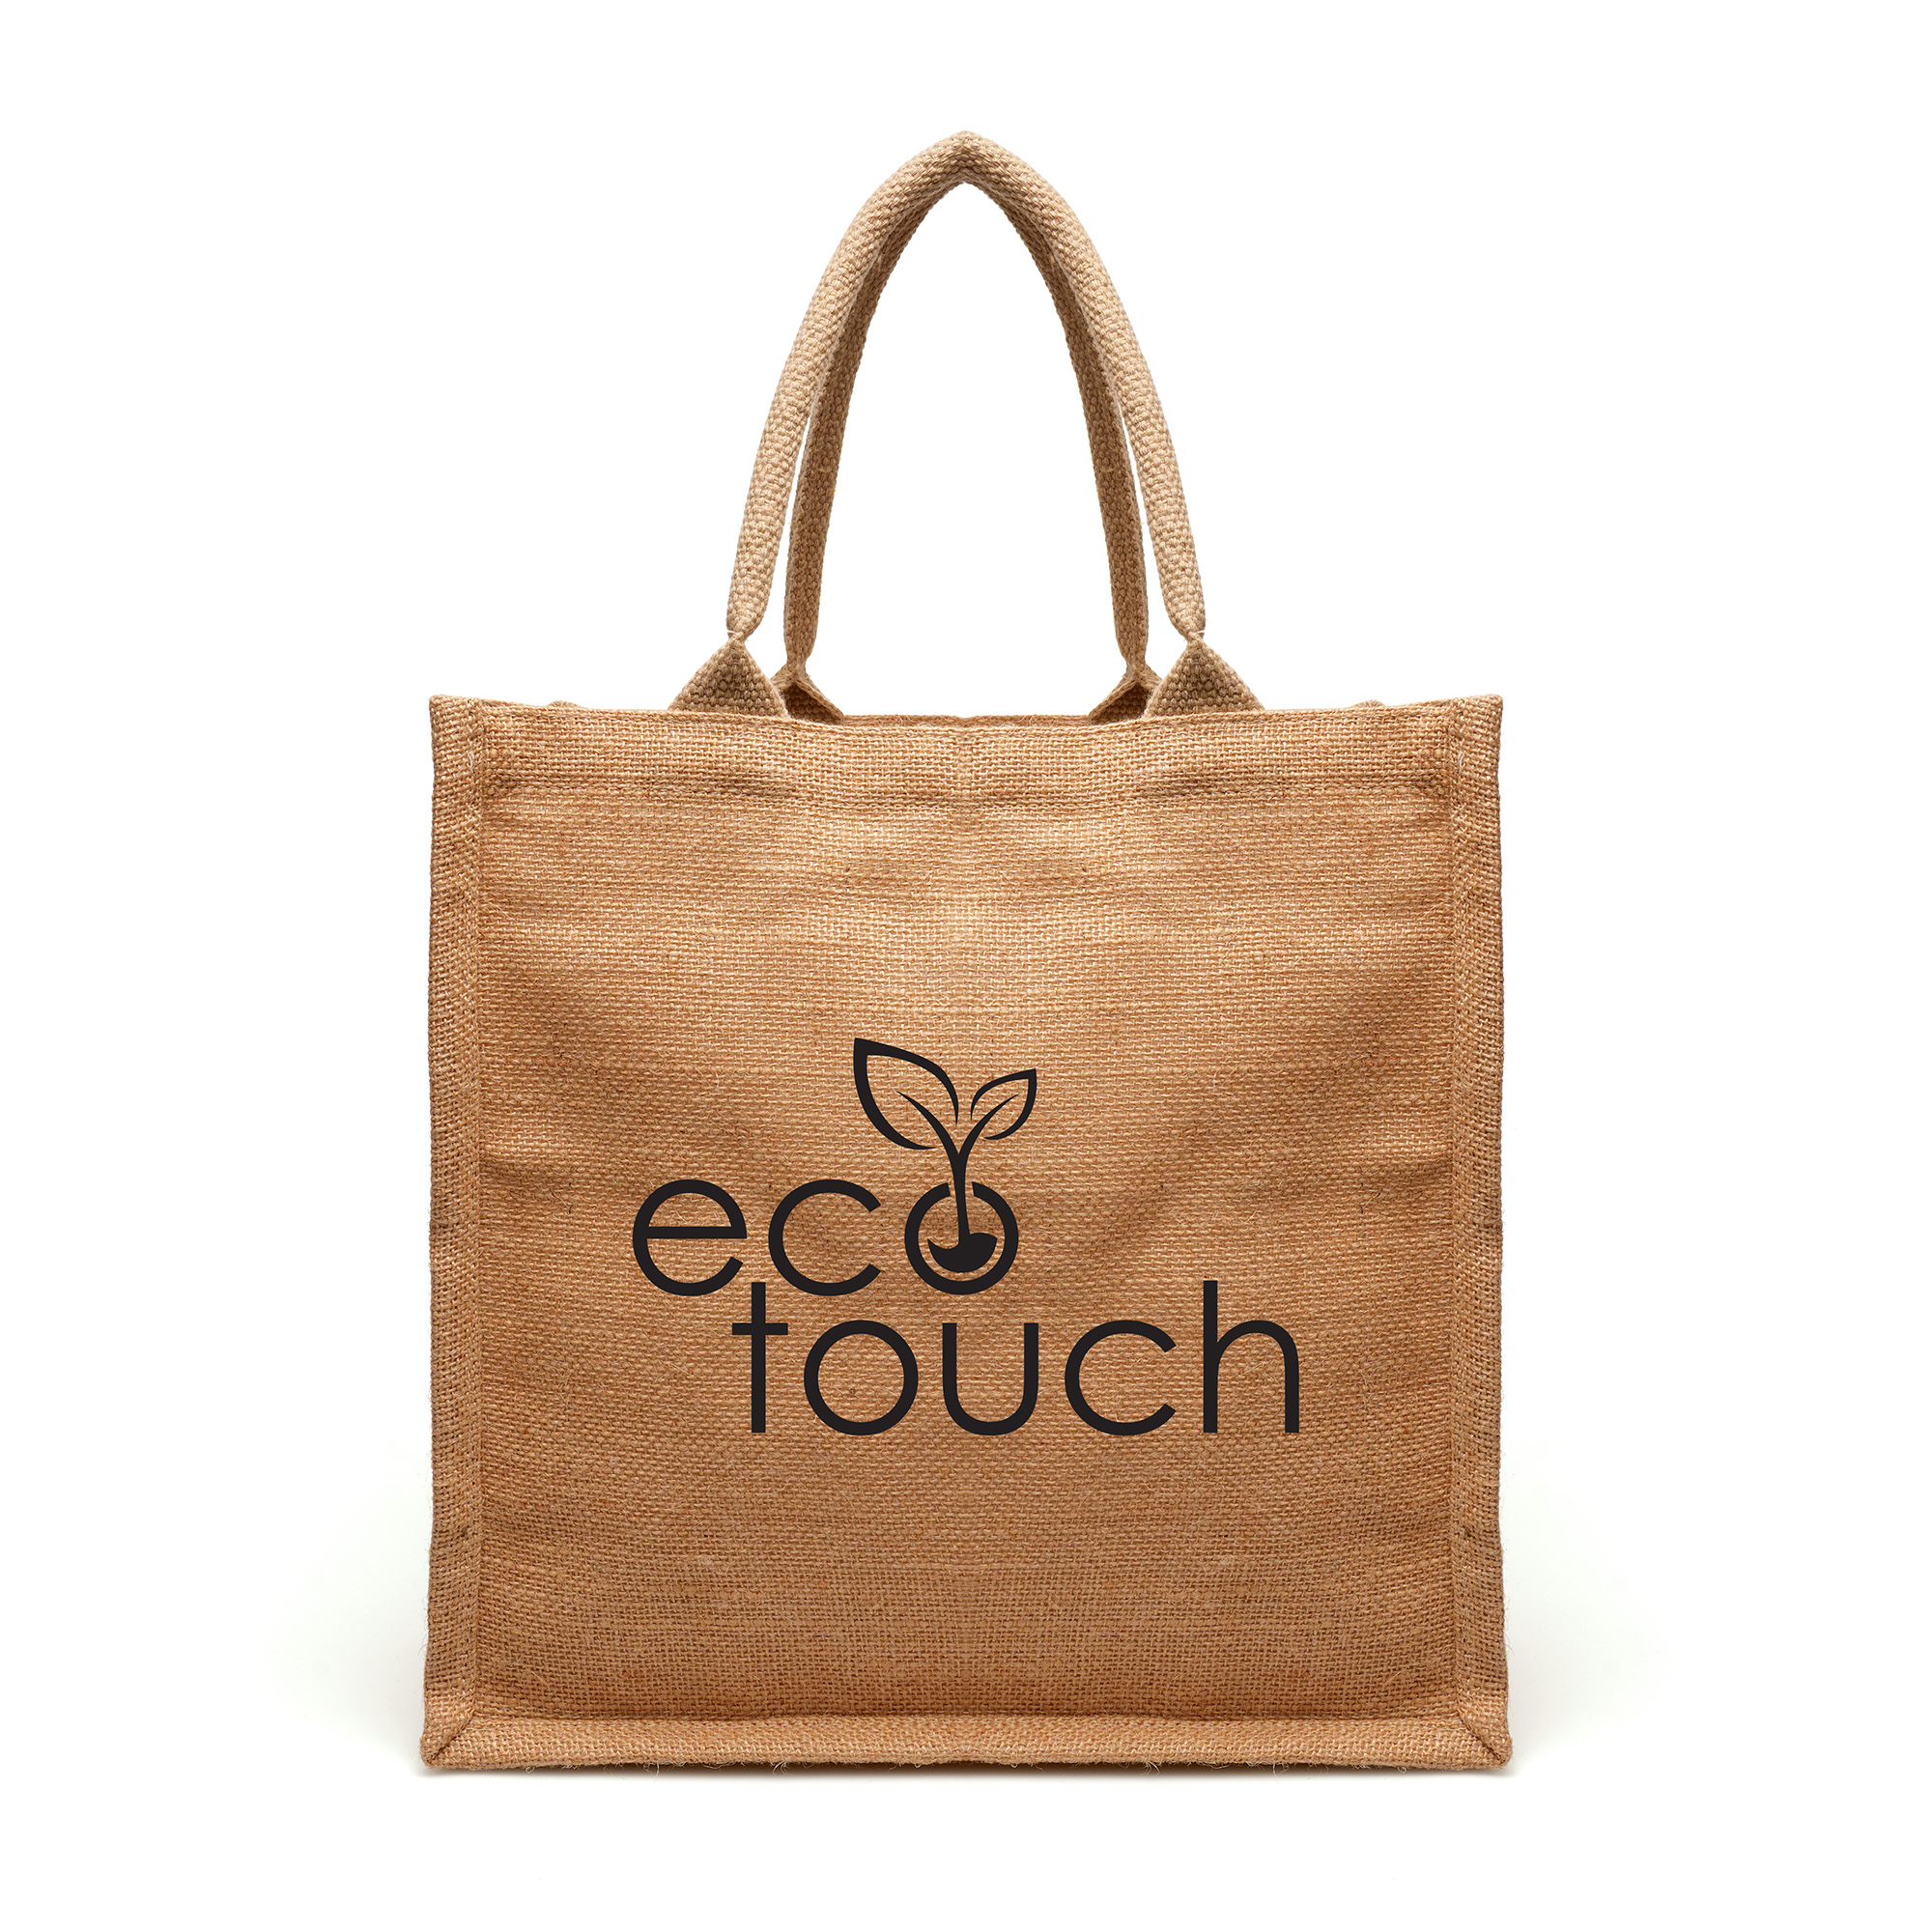 Crafted from natural jute, this compact and eco-friendly shopper has a gusset, padded cotton webbed handles and cotton lining.